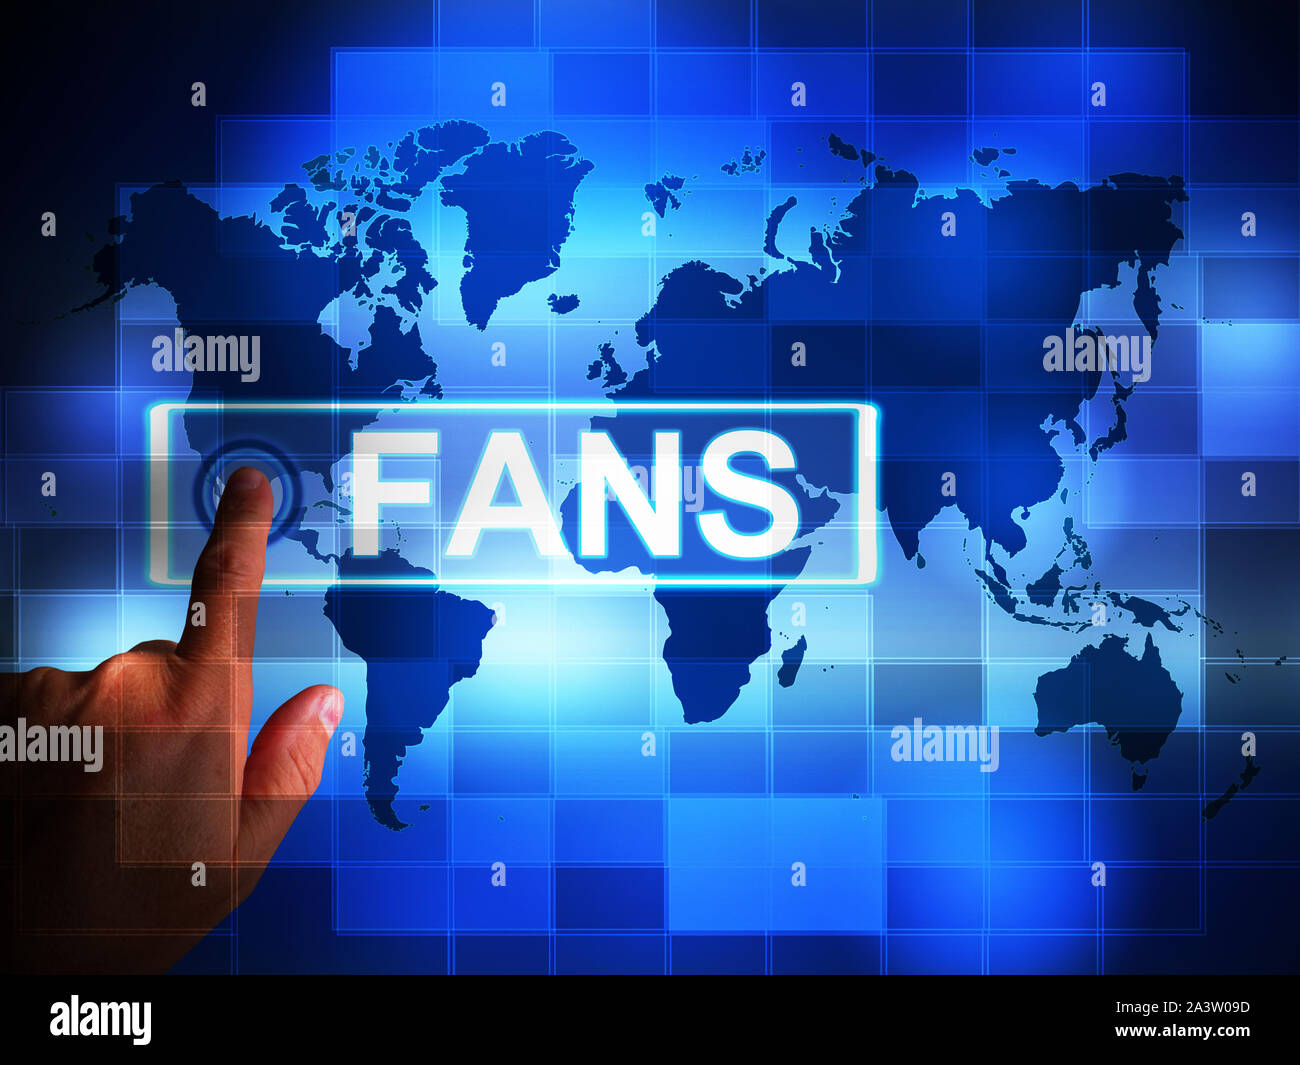 Fans concept icon means supporters and Believers who follow you. Patrons and sponsors who enthusiastically watch your progress - 3d illustration Stock Photo